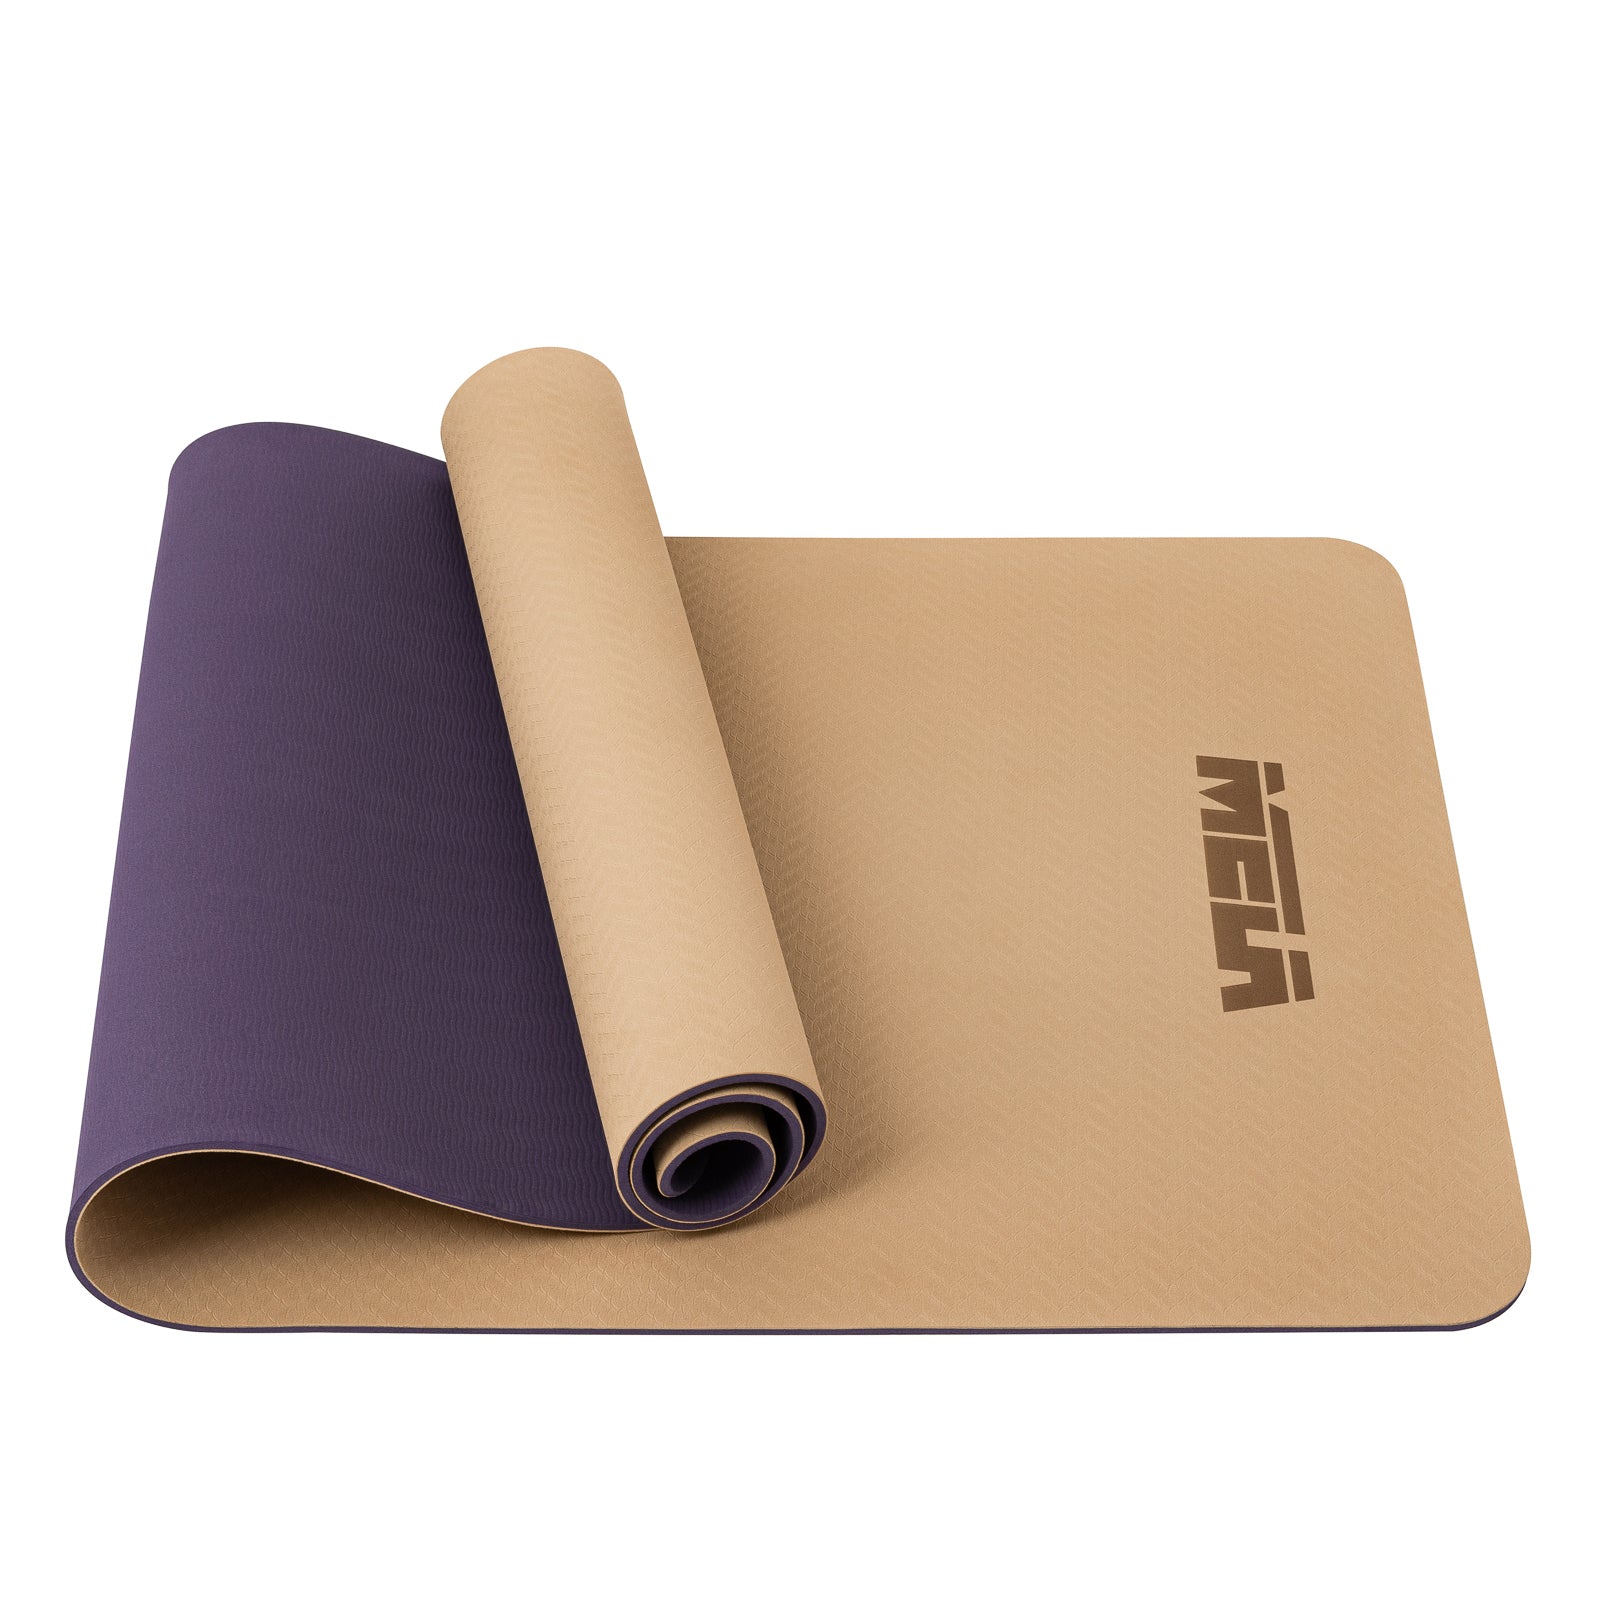 Yoga Mat,Exercise Fitness Mat - High-Density Non-Slip TPE Workout Mat for  Yoga, Pilates & Exercises, Anti - Tear, Sweat - Proof, Classic 15mm Thick